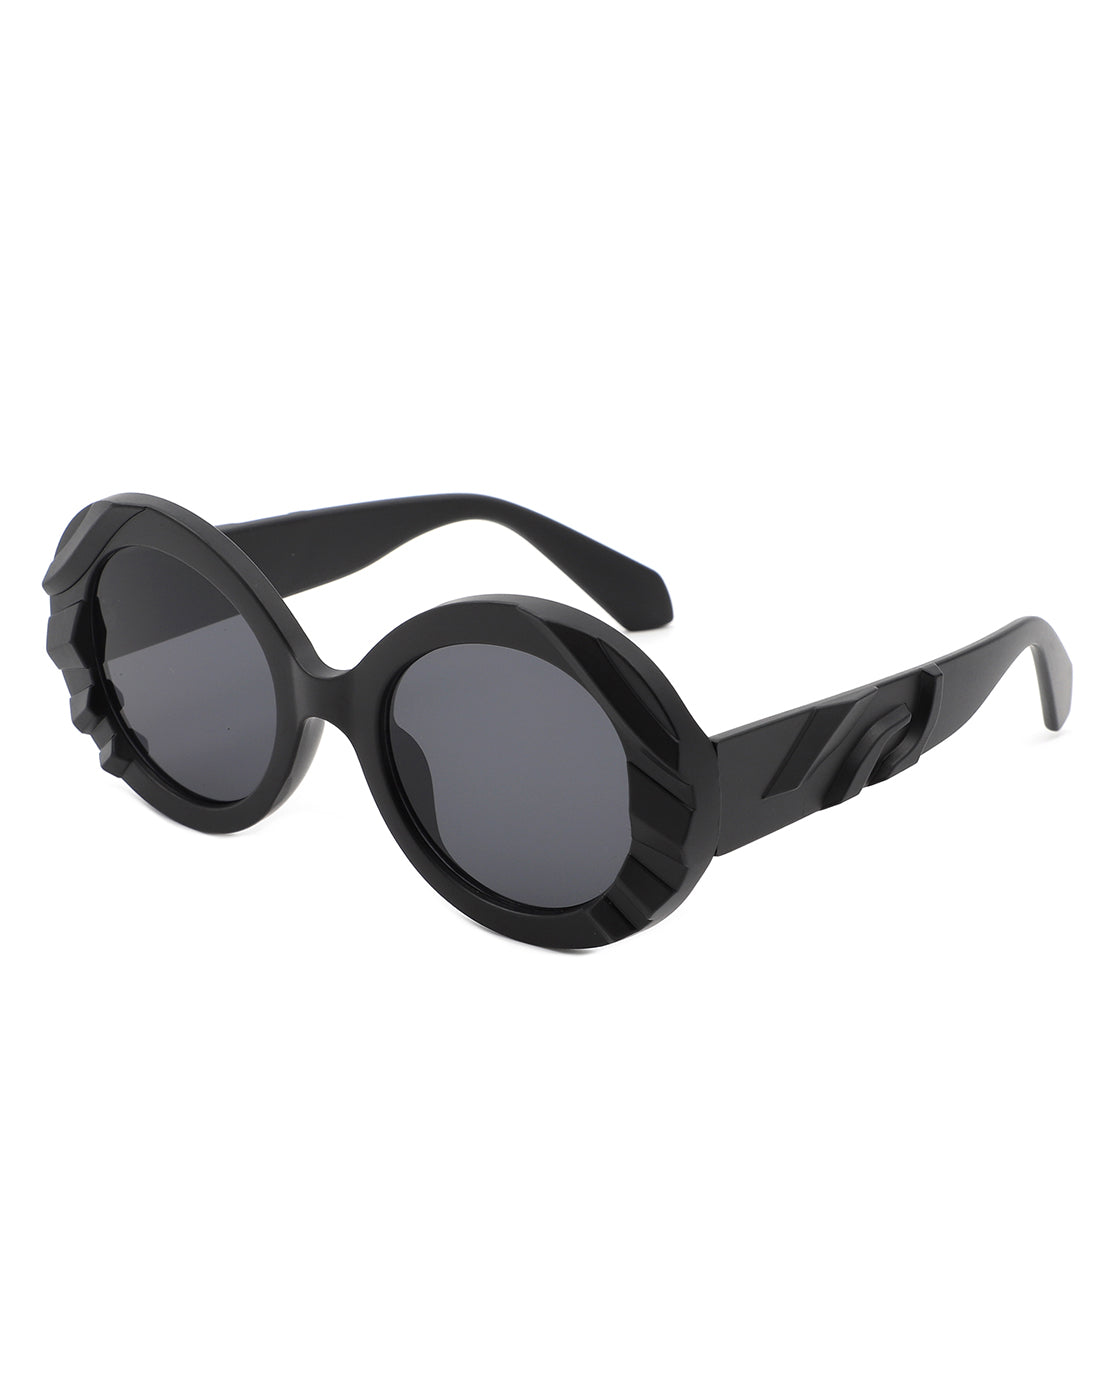 Xasheubia - Women's Chunky Oval Sculpted Round Sunglasses